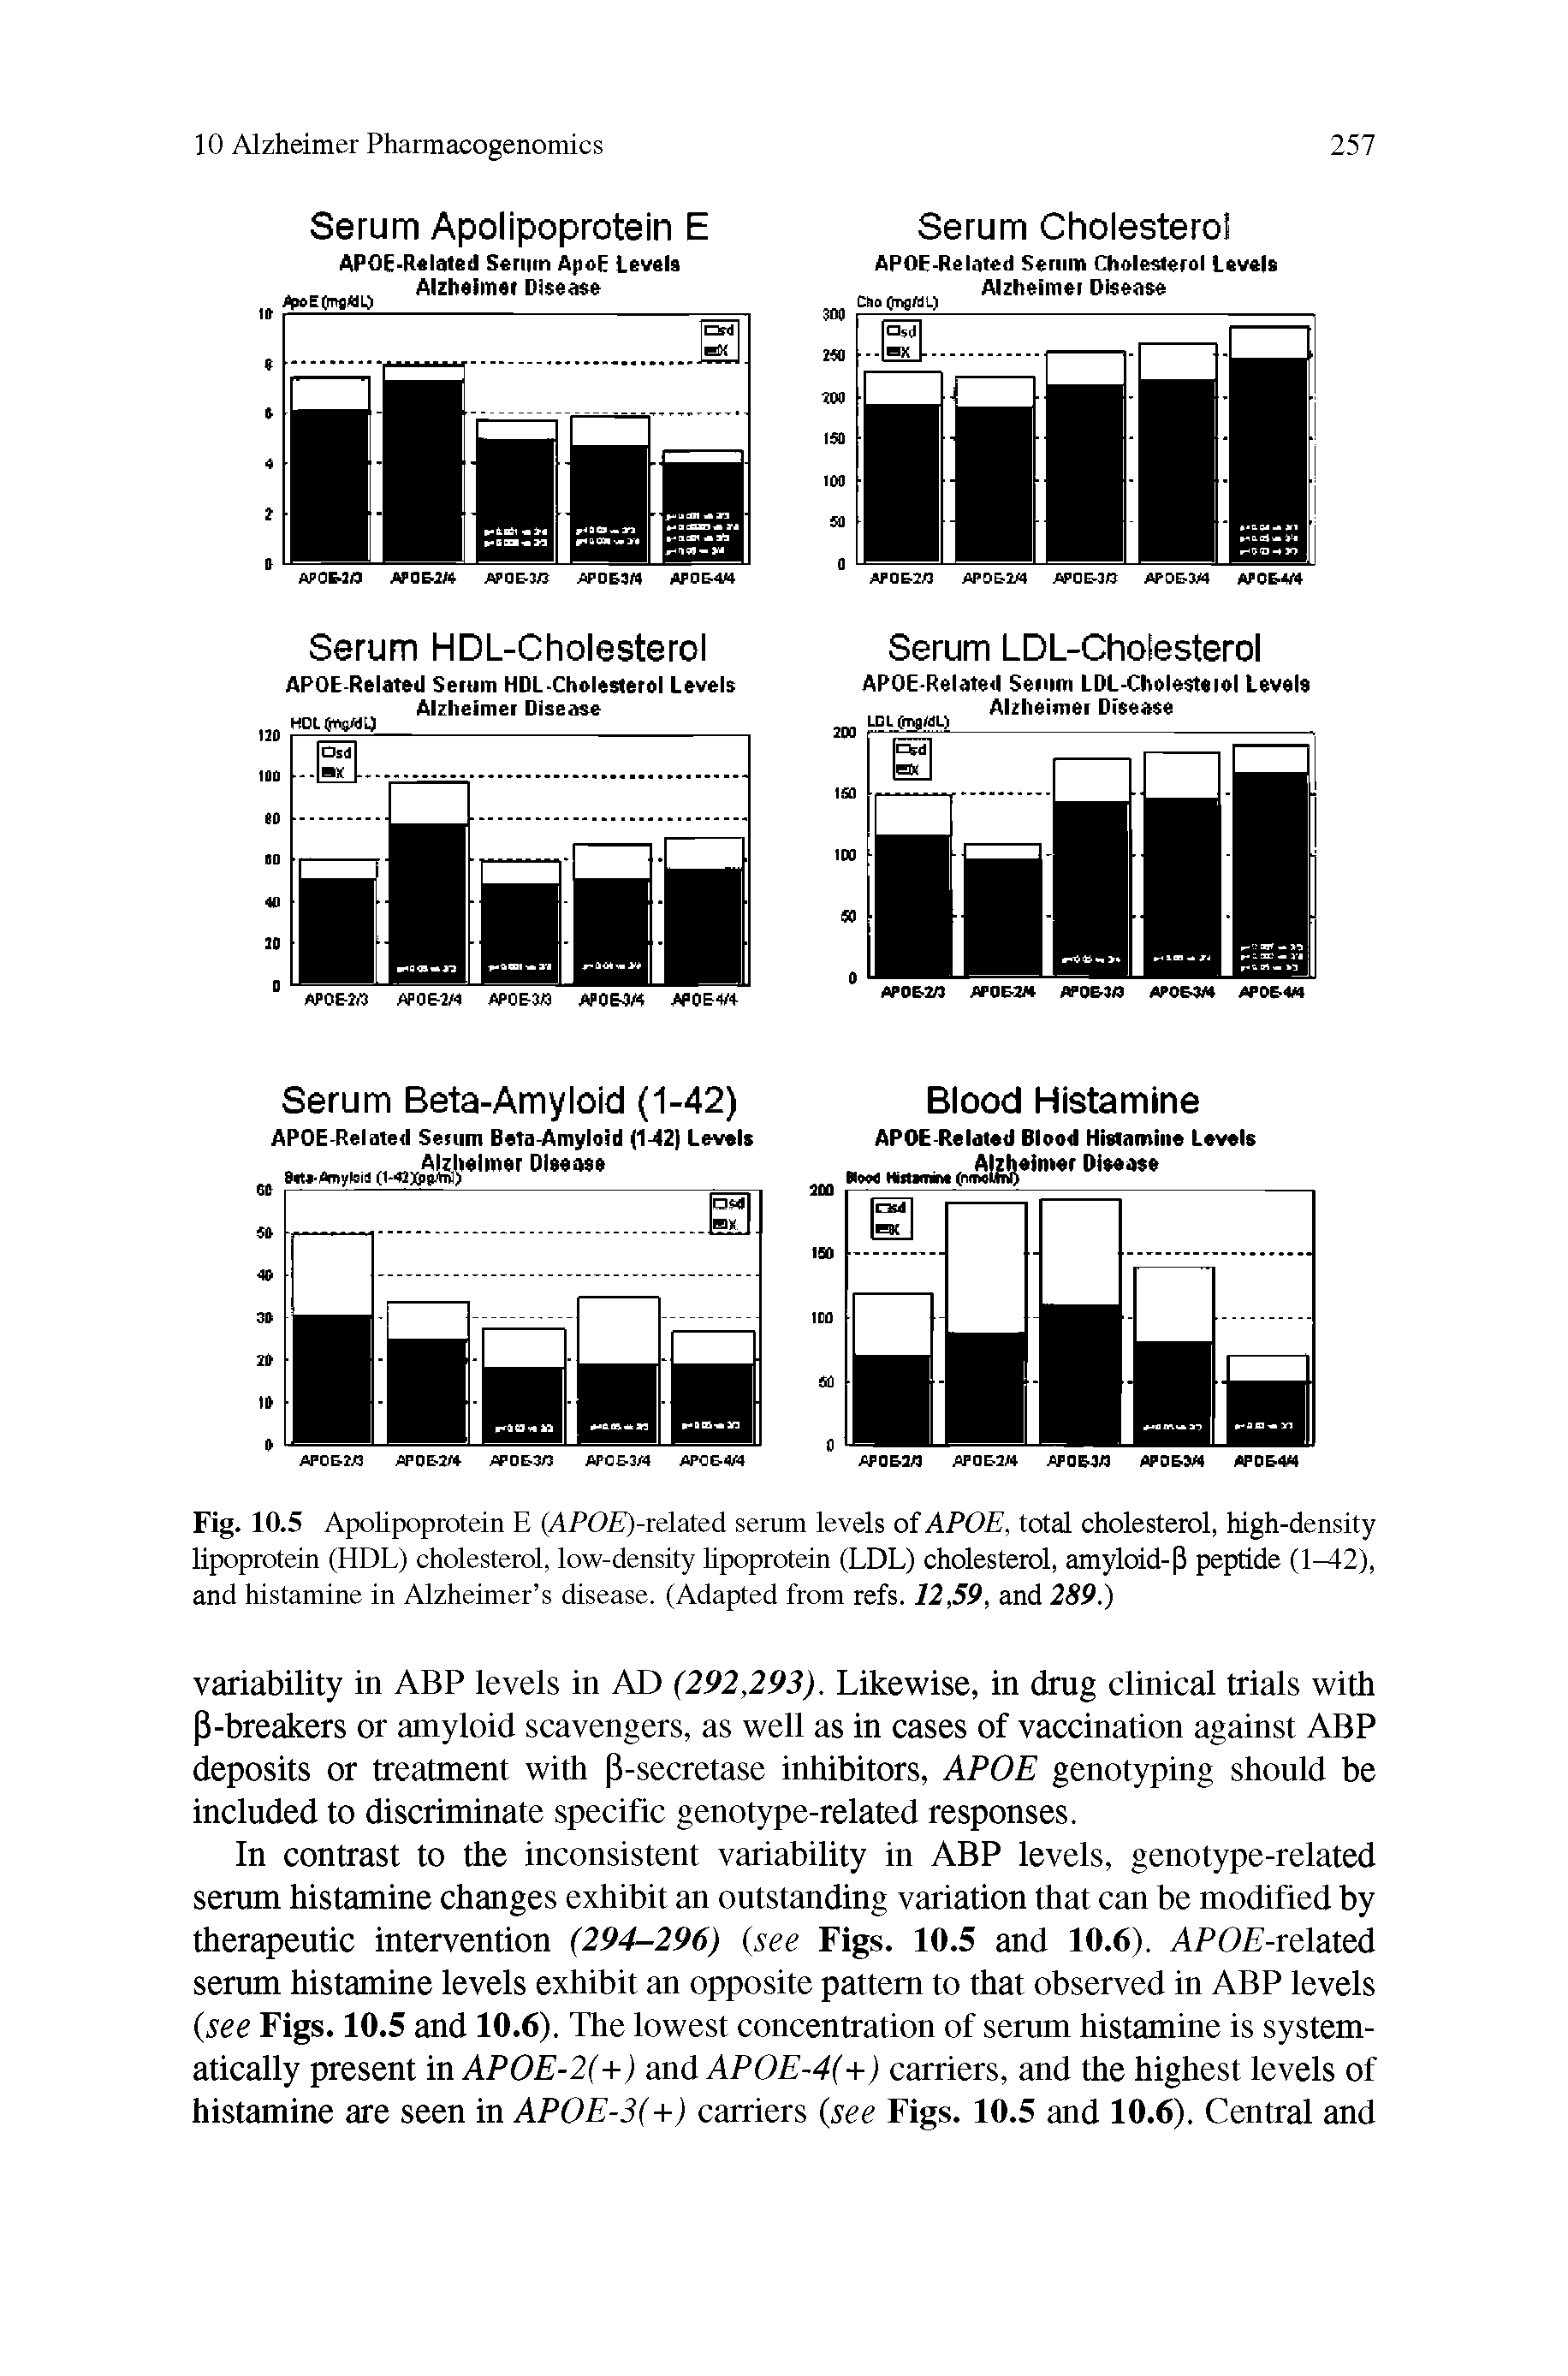 Fig. 10.5 Apolipoprotein E (APOE)-relsled serum levels of APOE, total cholesterol, high-density lipoprotein (HDL) cholesterol, low-density hpoprotein (LDL) cholesterol, amyloid- 3 peptide (1 2), and histamine in Alzheimer s disease. (Adapted from refs. 12,59, and 289.)...